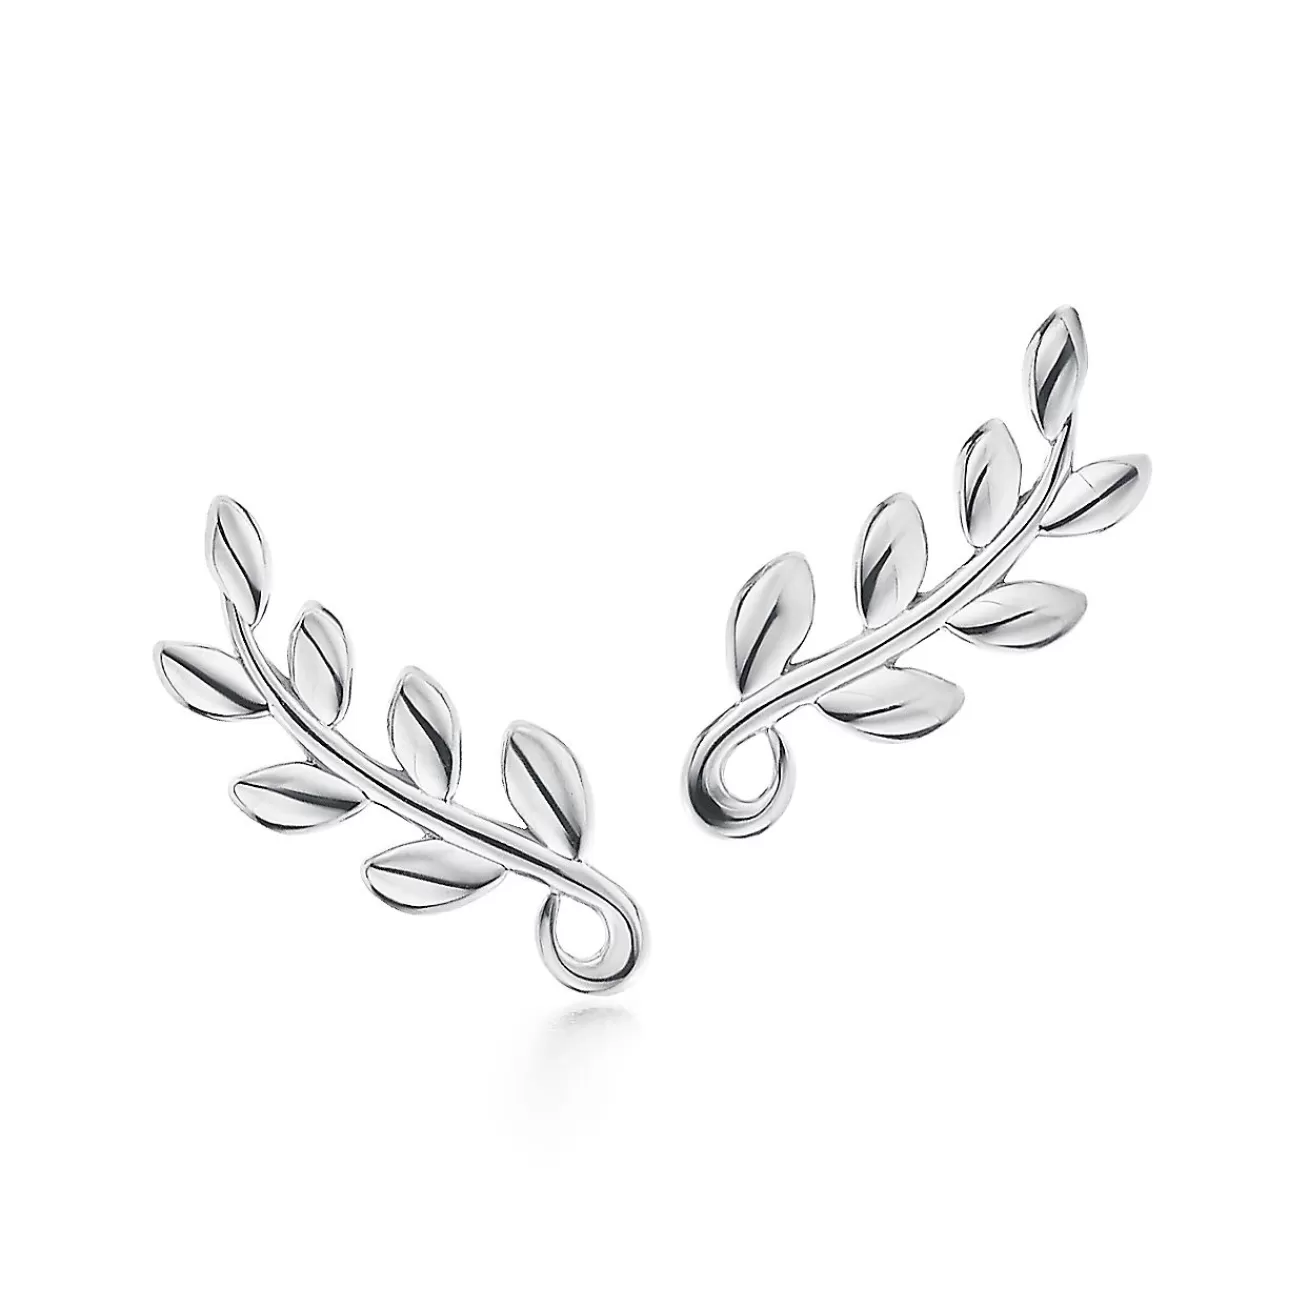 Tiffany & Co. Paloma Picasso® Olive Leaf climber earrings in sterling silver. | ^ Earrings | Gifts for Her